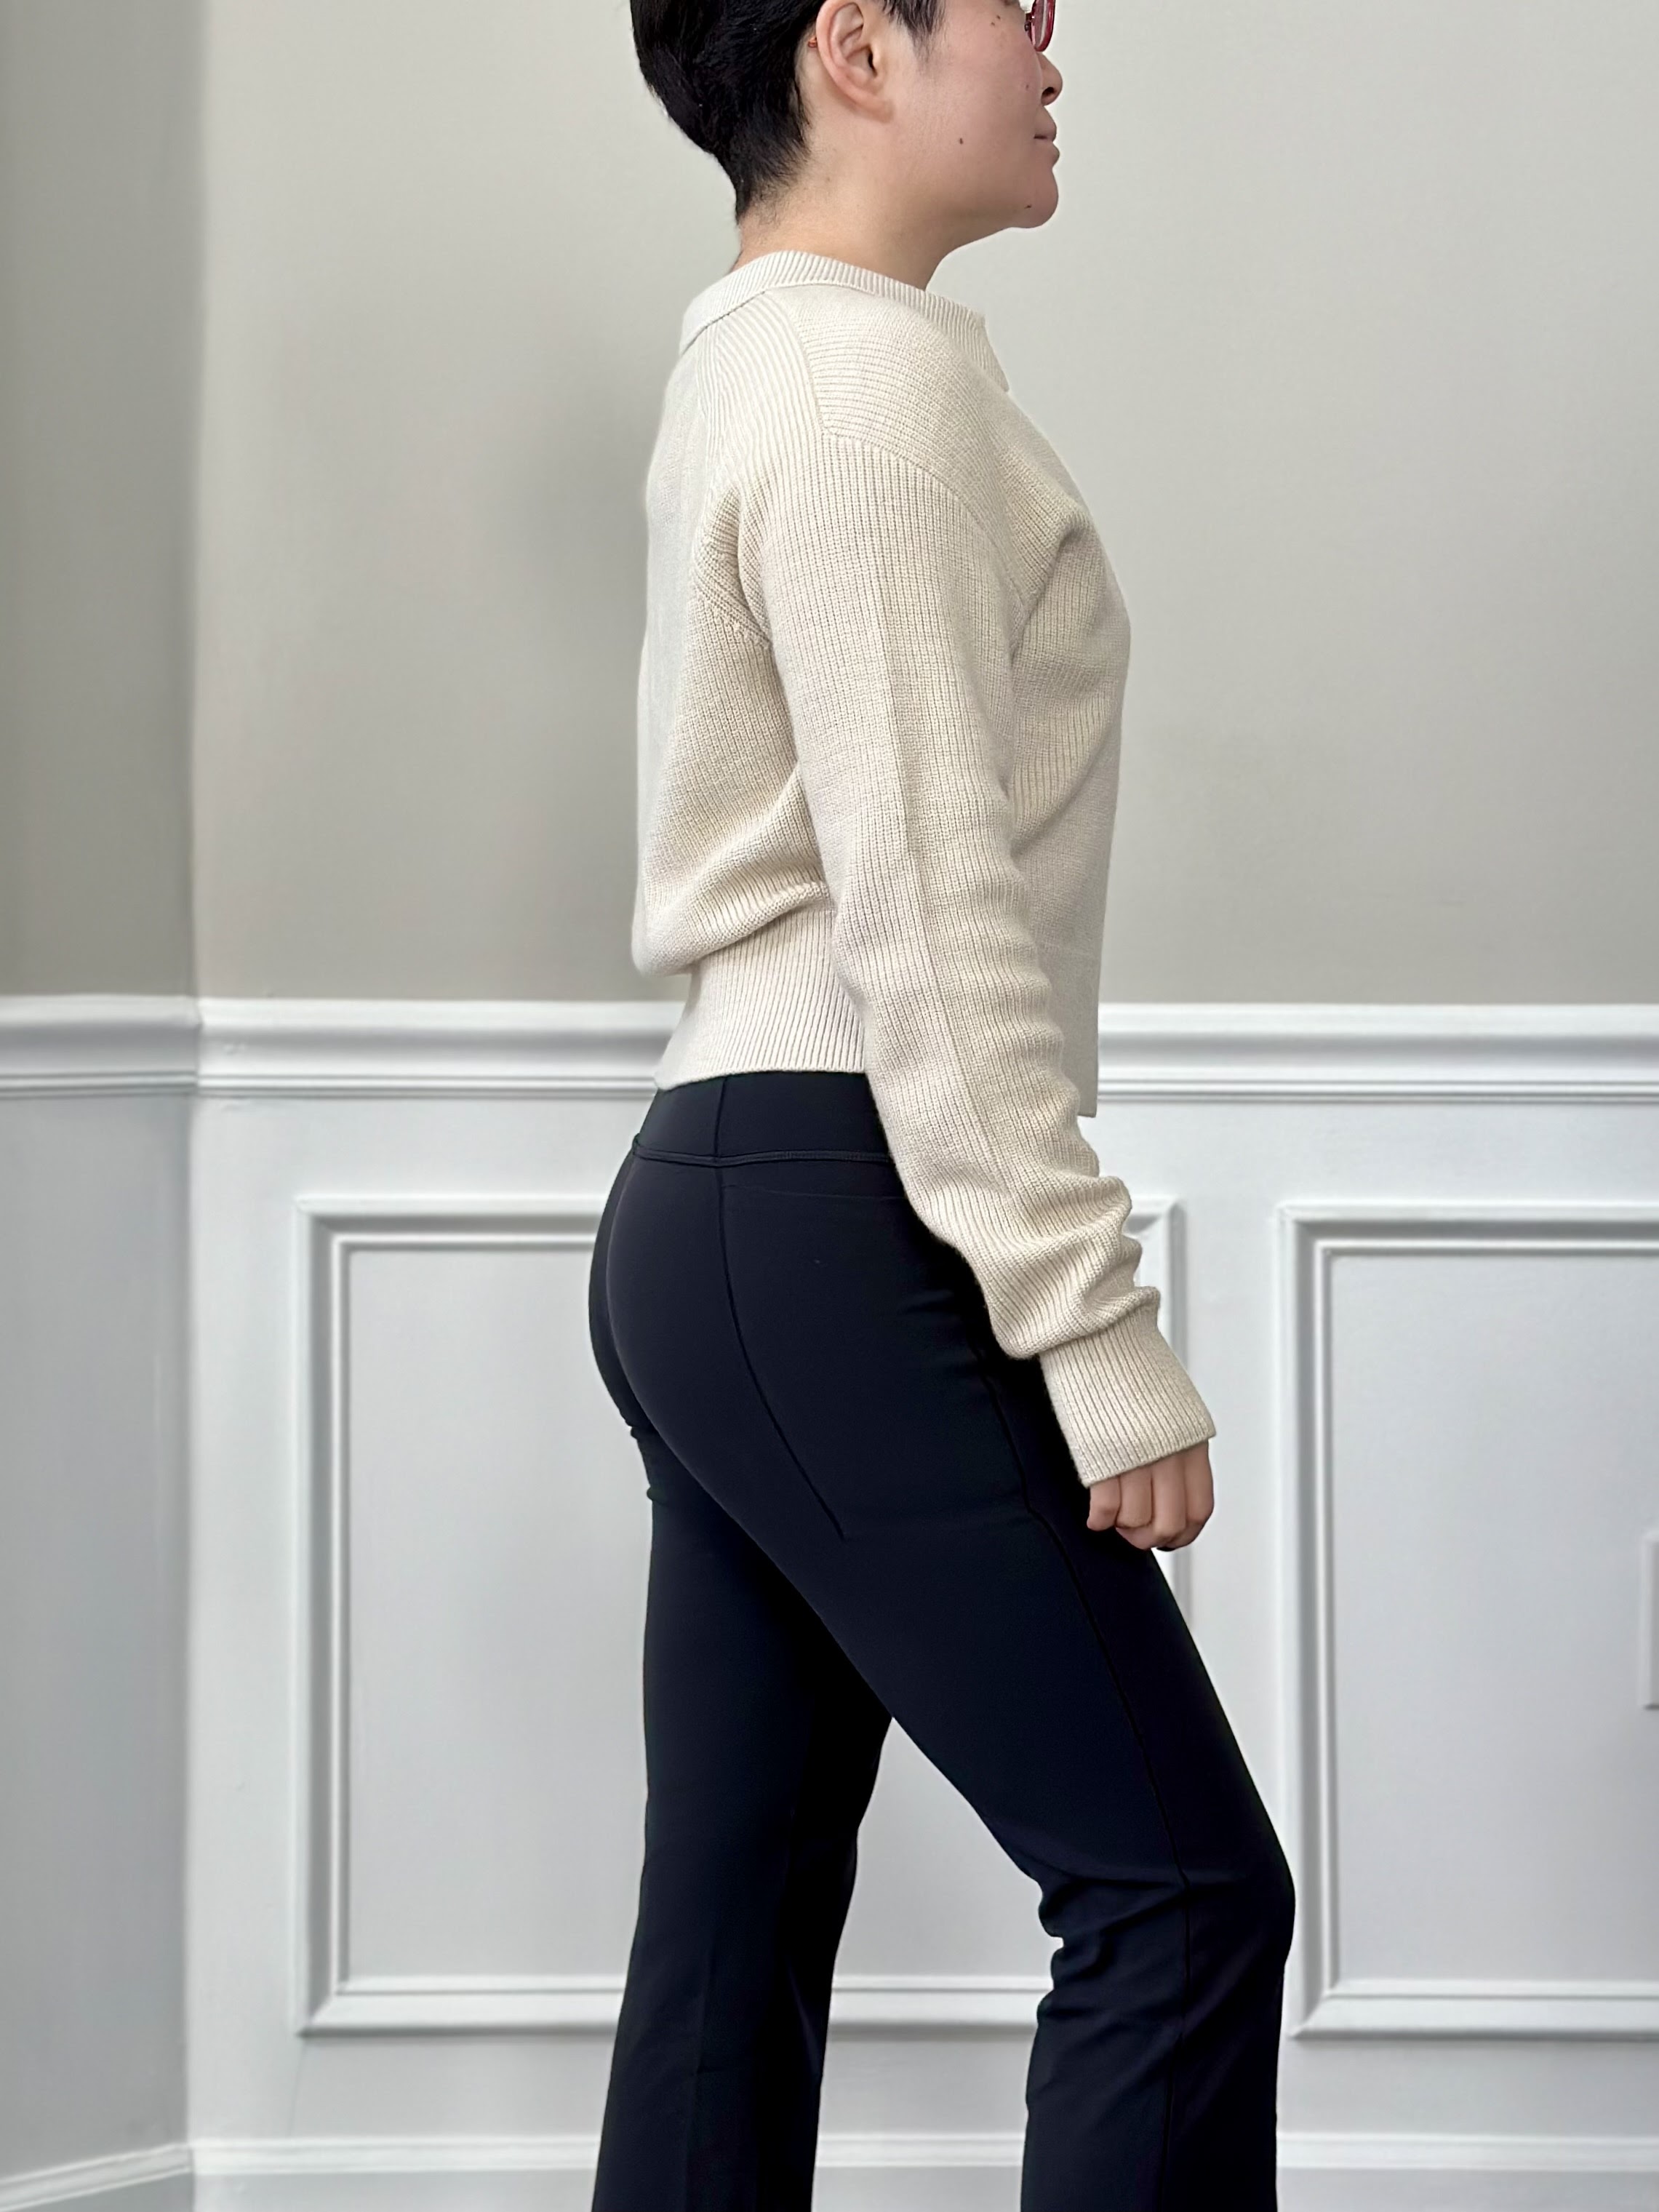 Fit Review! Lululemon Collared Merino Wool Blend Sweater